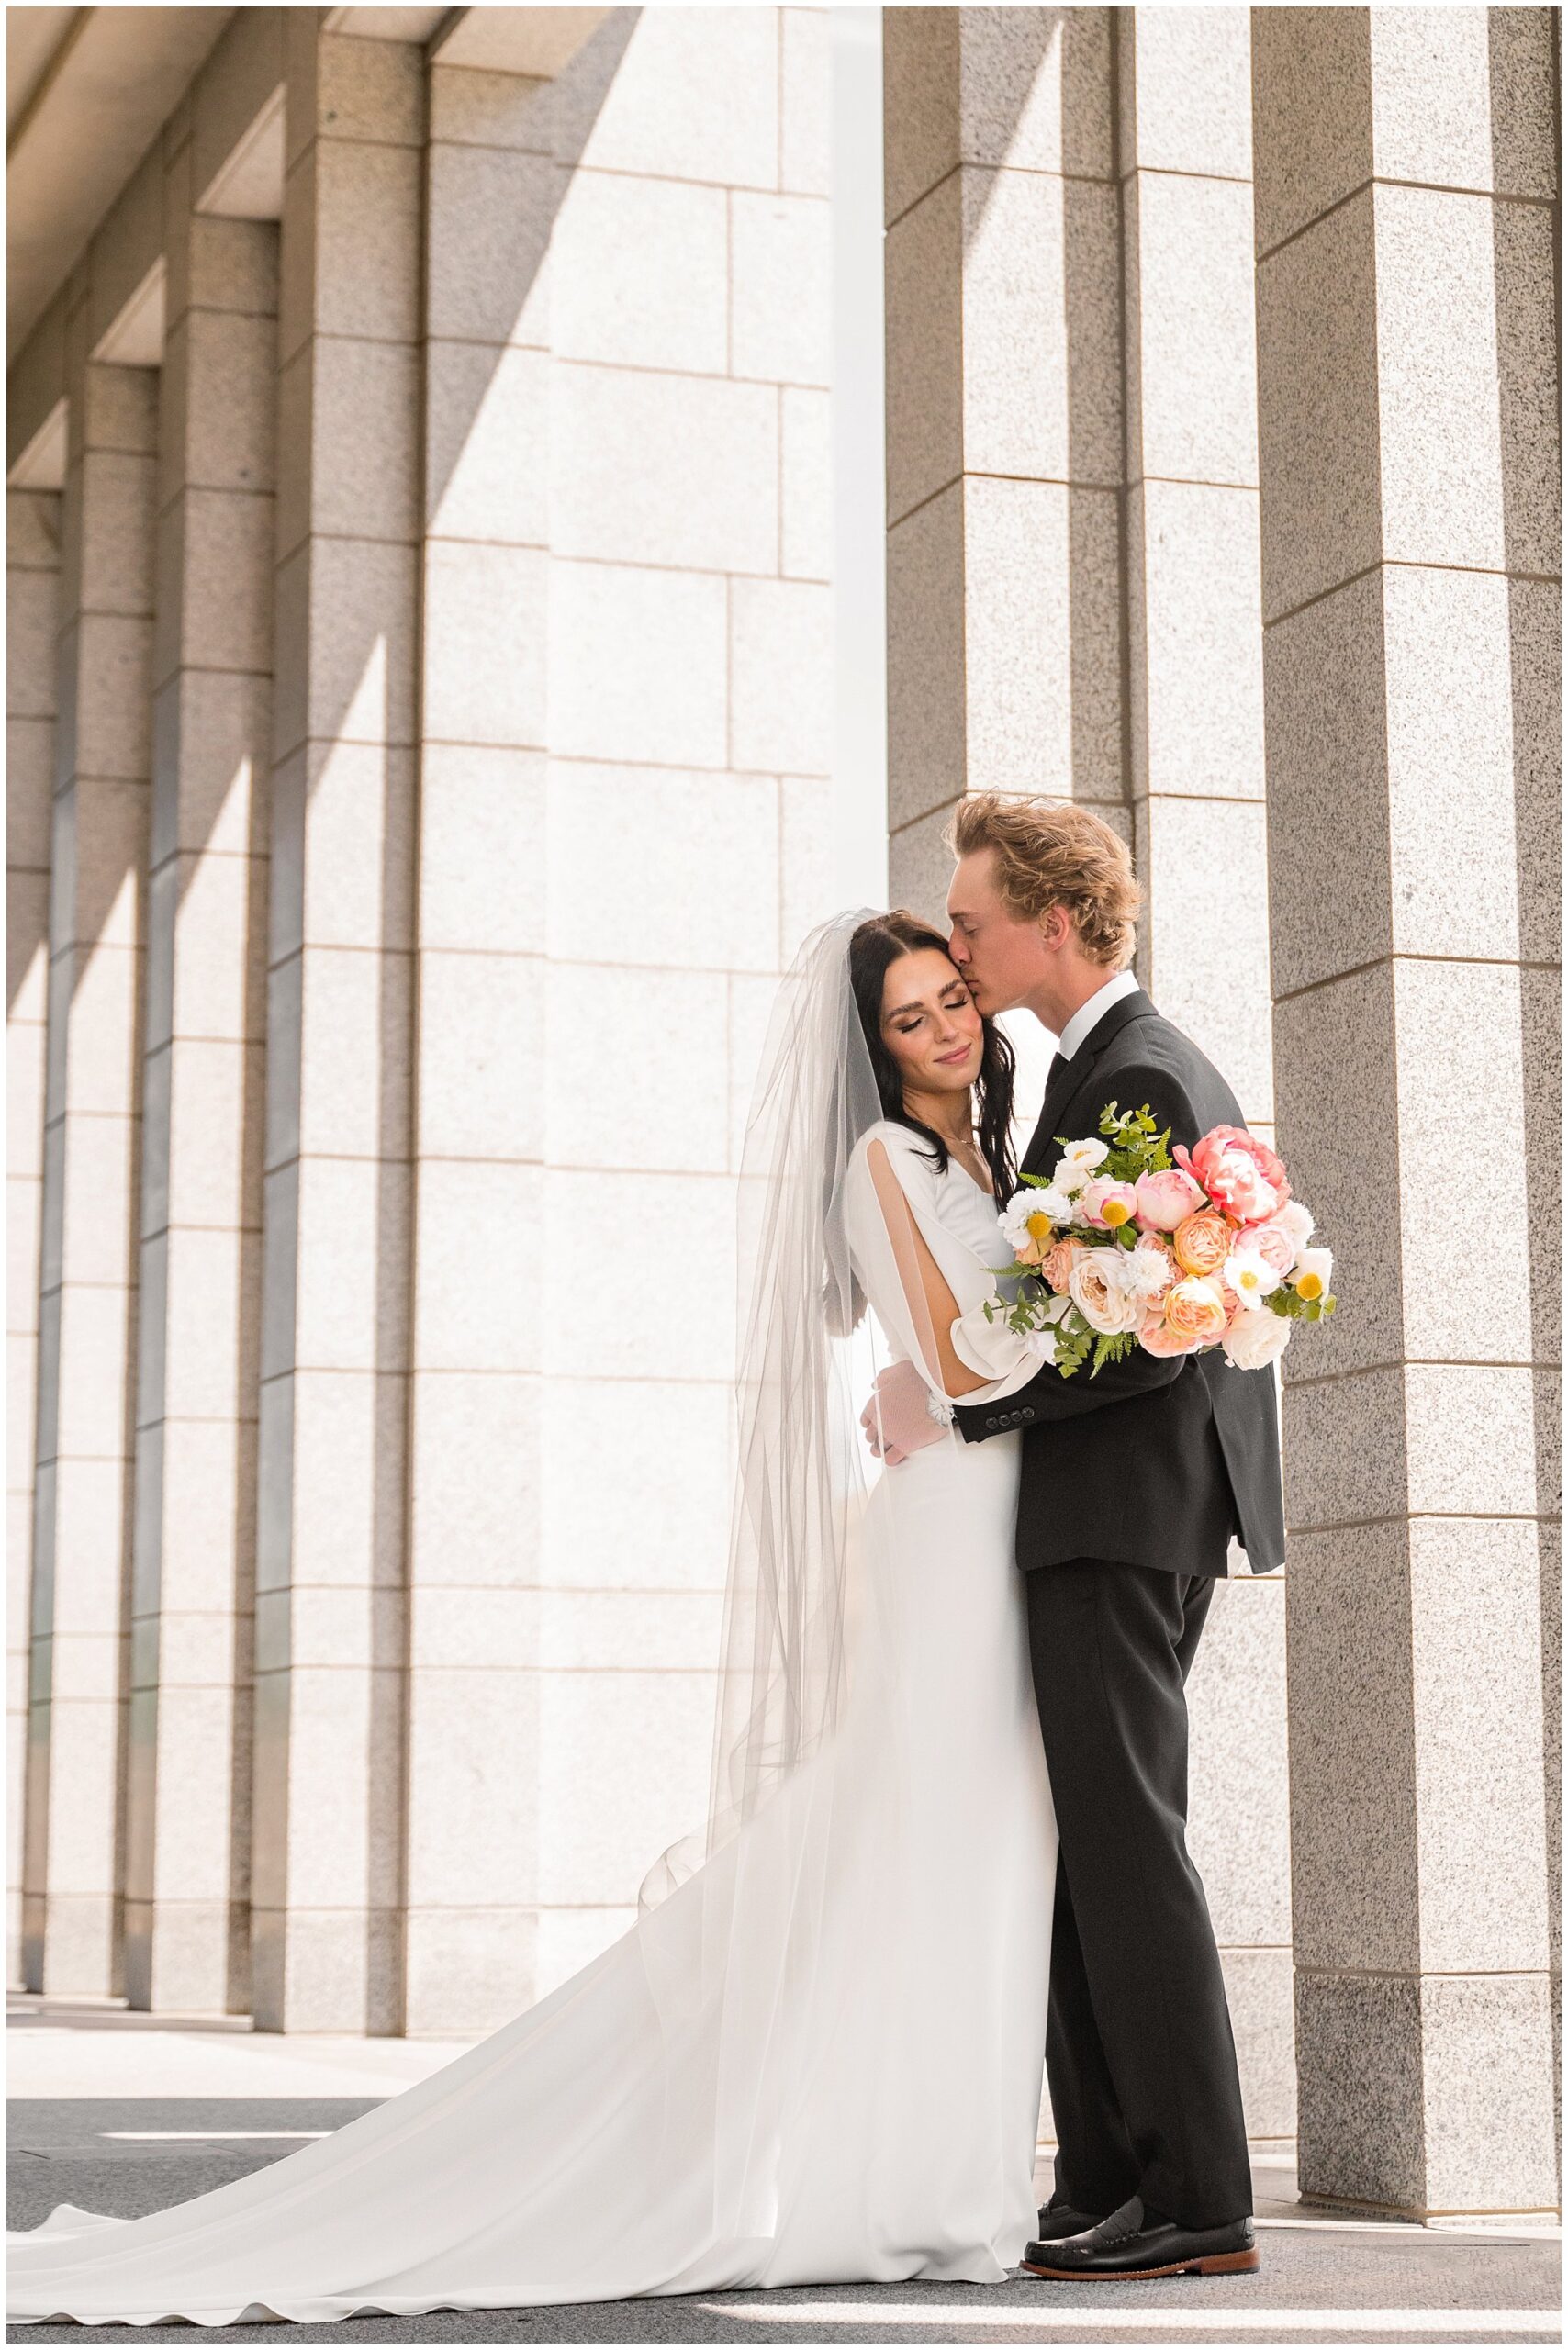 Couples Portraits at the the temple | Draper Temple and Wadley Farms Summer Castle Wedding | Jessie and Dallin Photography